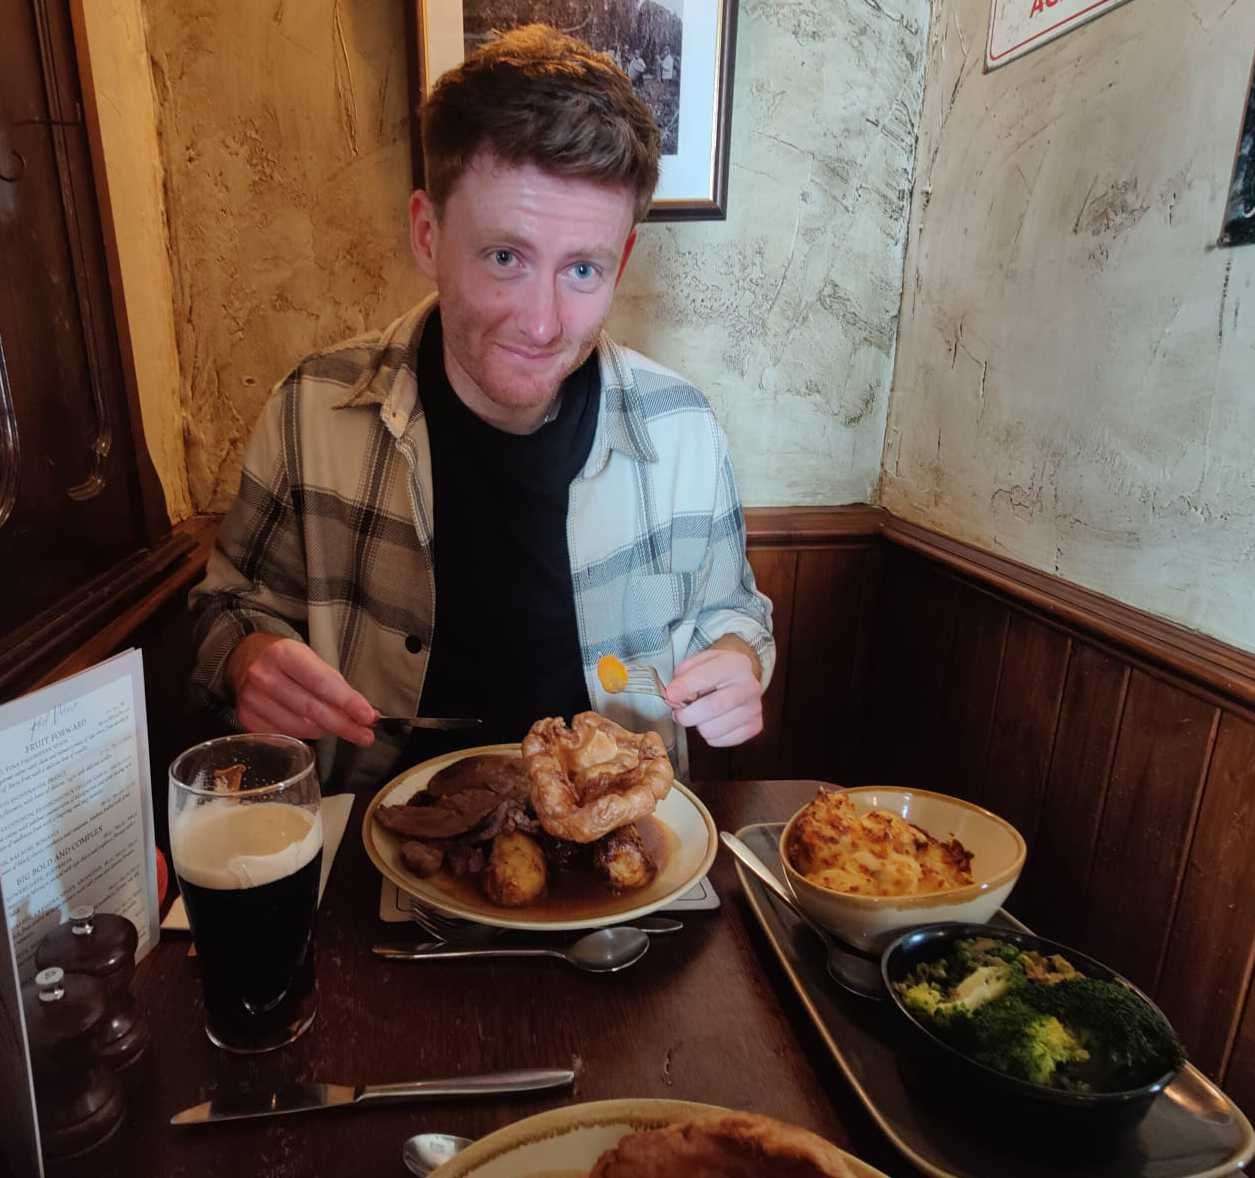 Our reviewer tucks into his sizeable Sunday Lunch